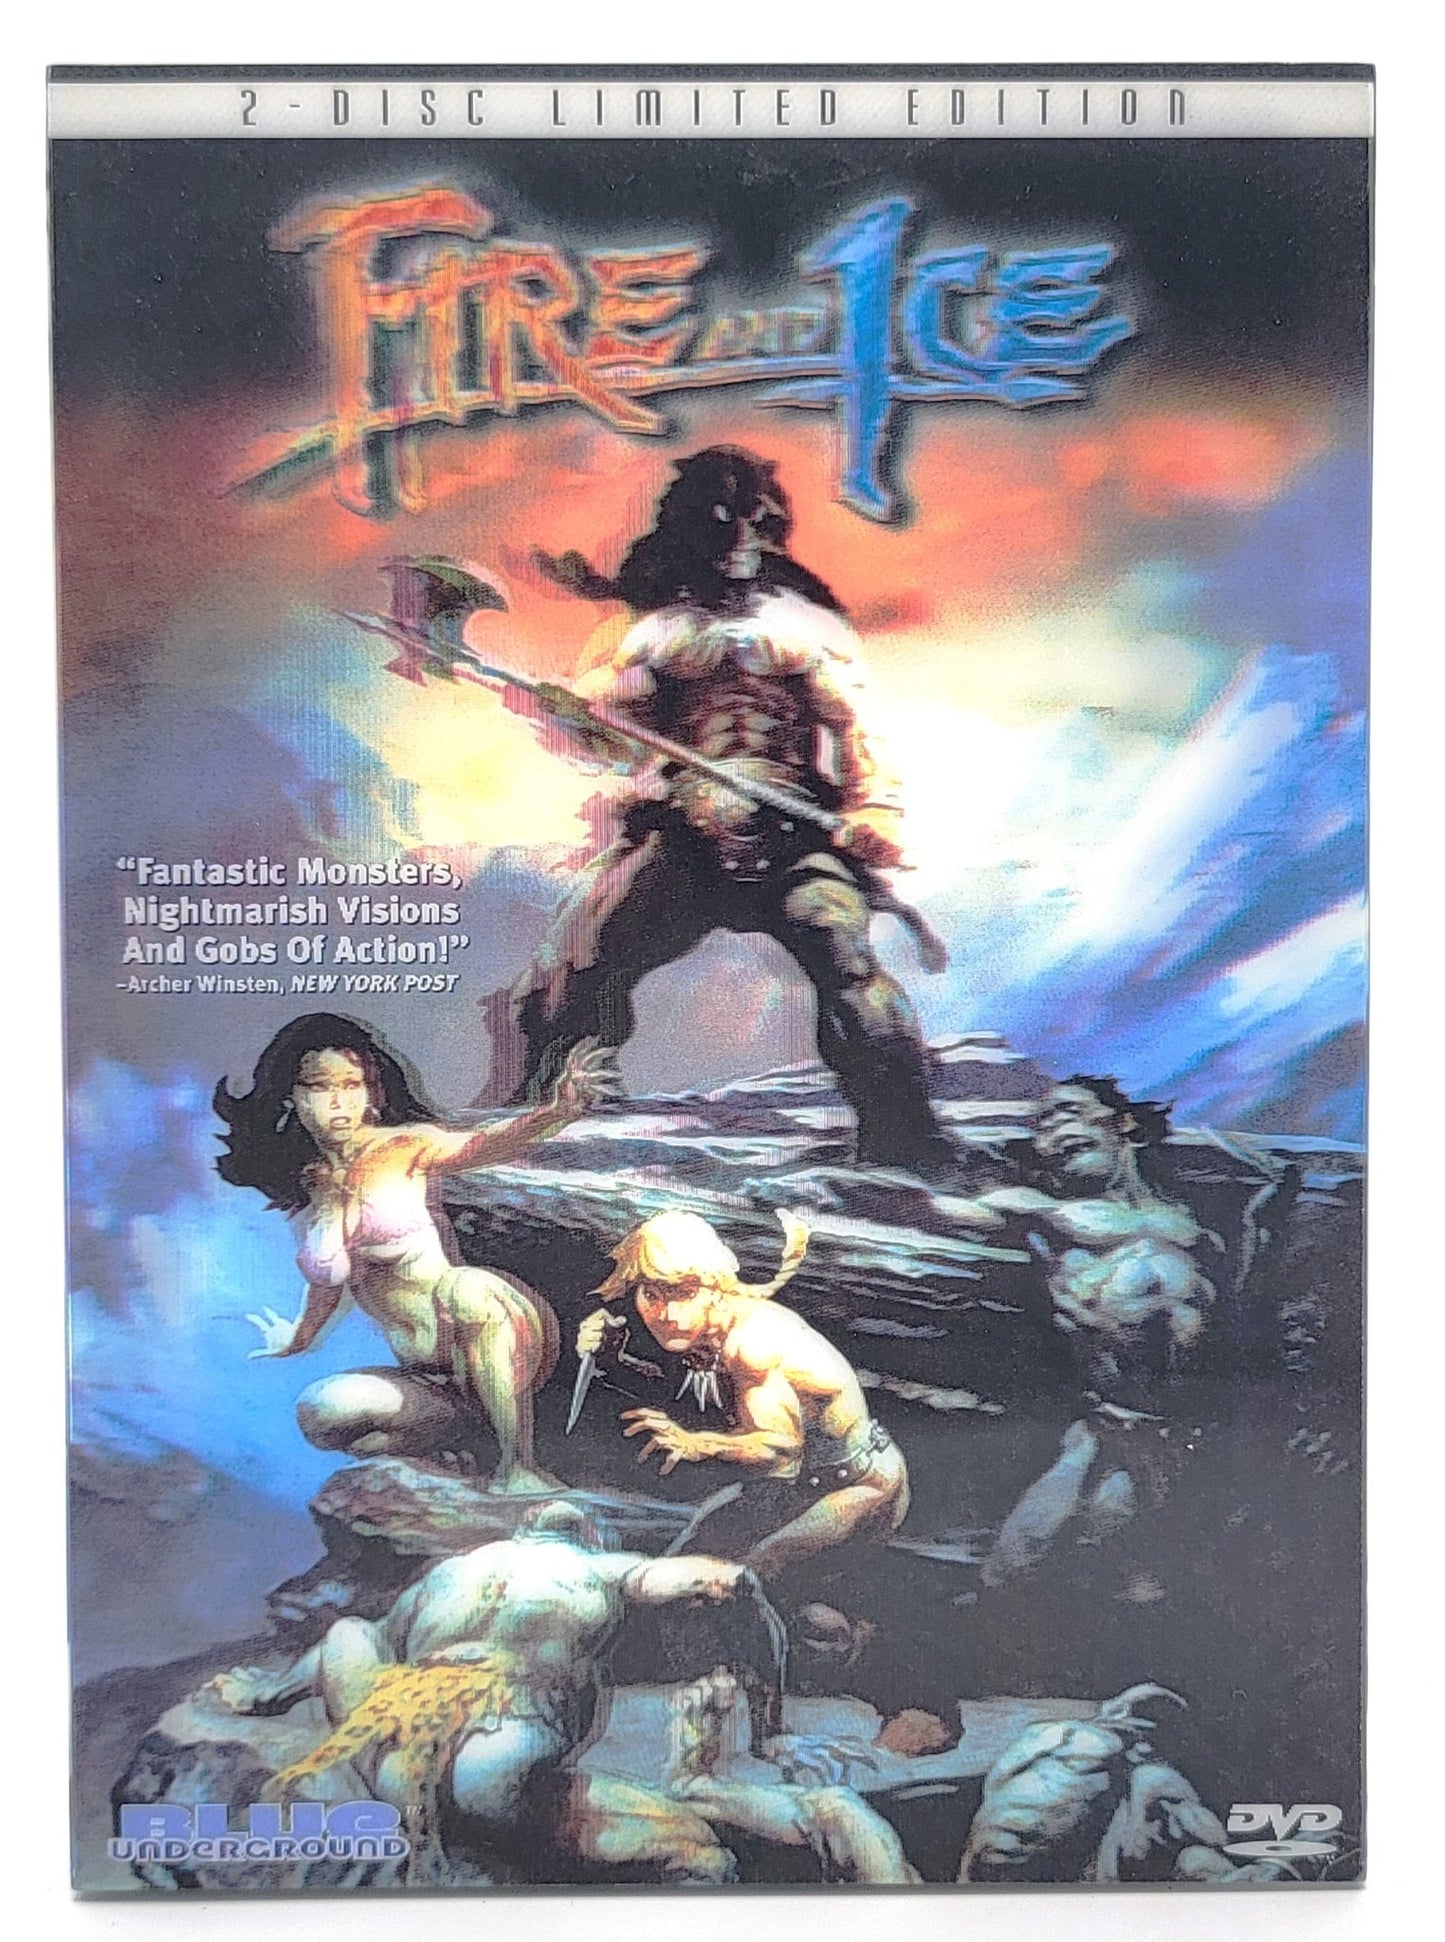 Blue Underground - Fire and Ice | 2 Disc Limited Edition | DVD | Widescreen - DVD - Steady Bunny Shop